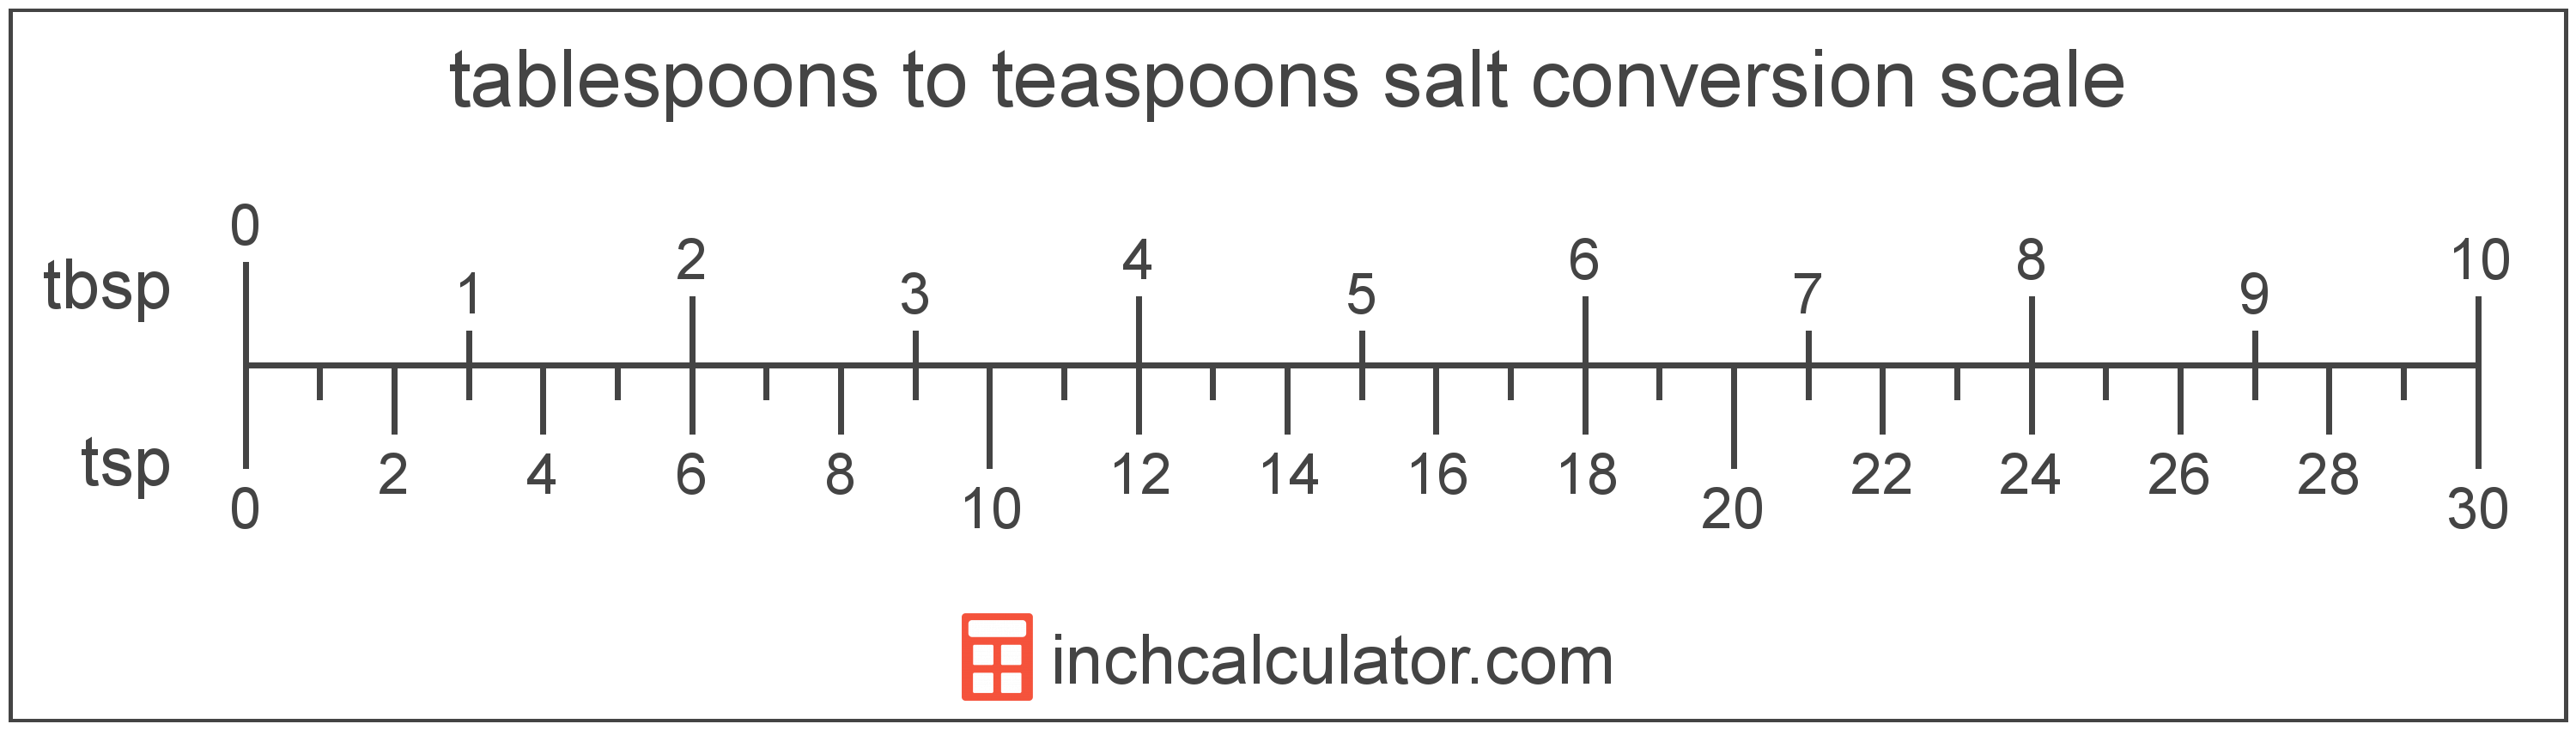 conversion scale showing teaspoons and equivalent tablespoons salt volume values